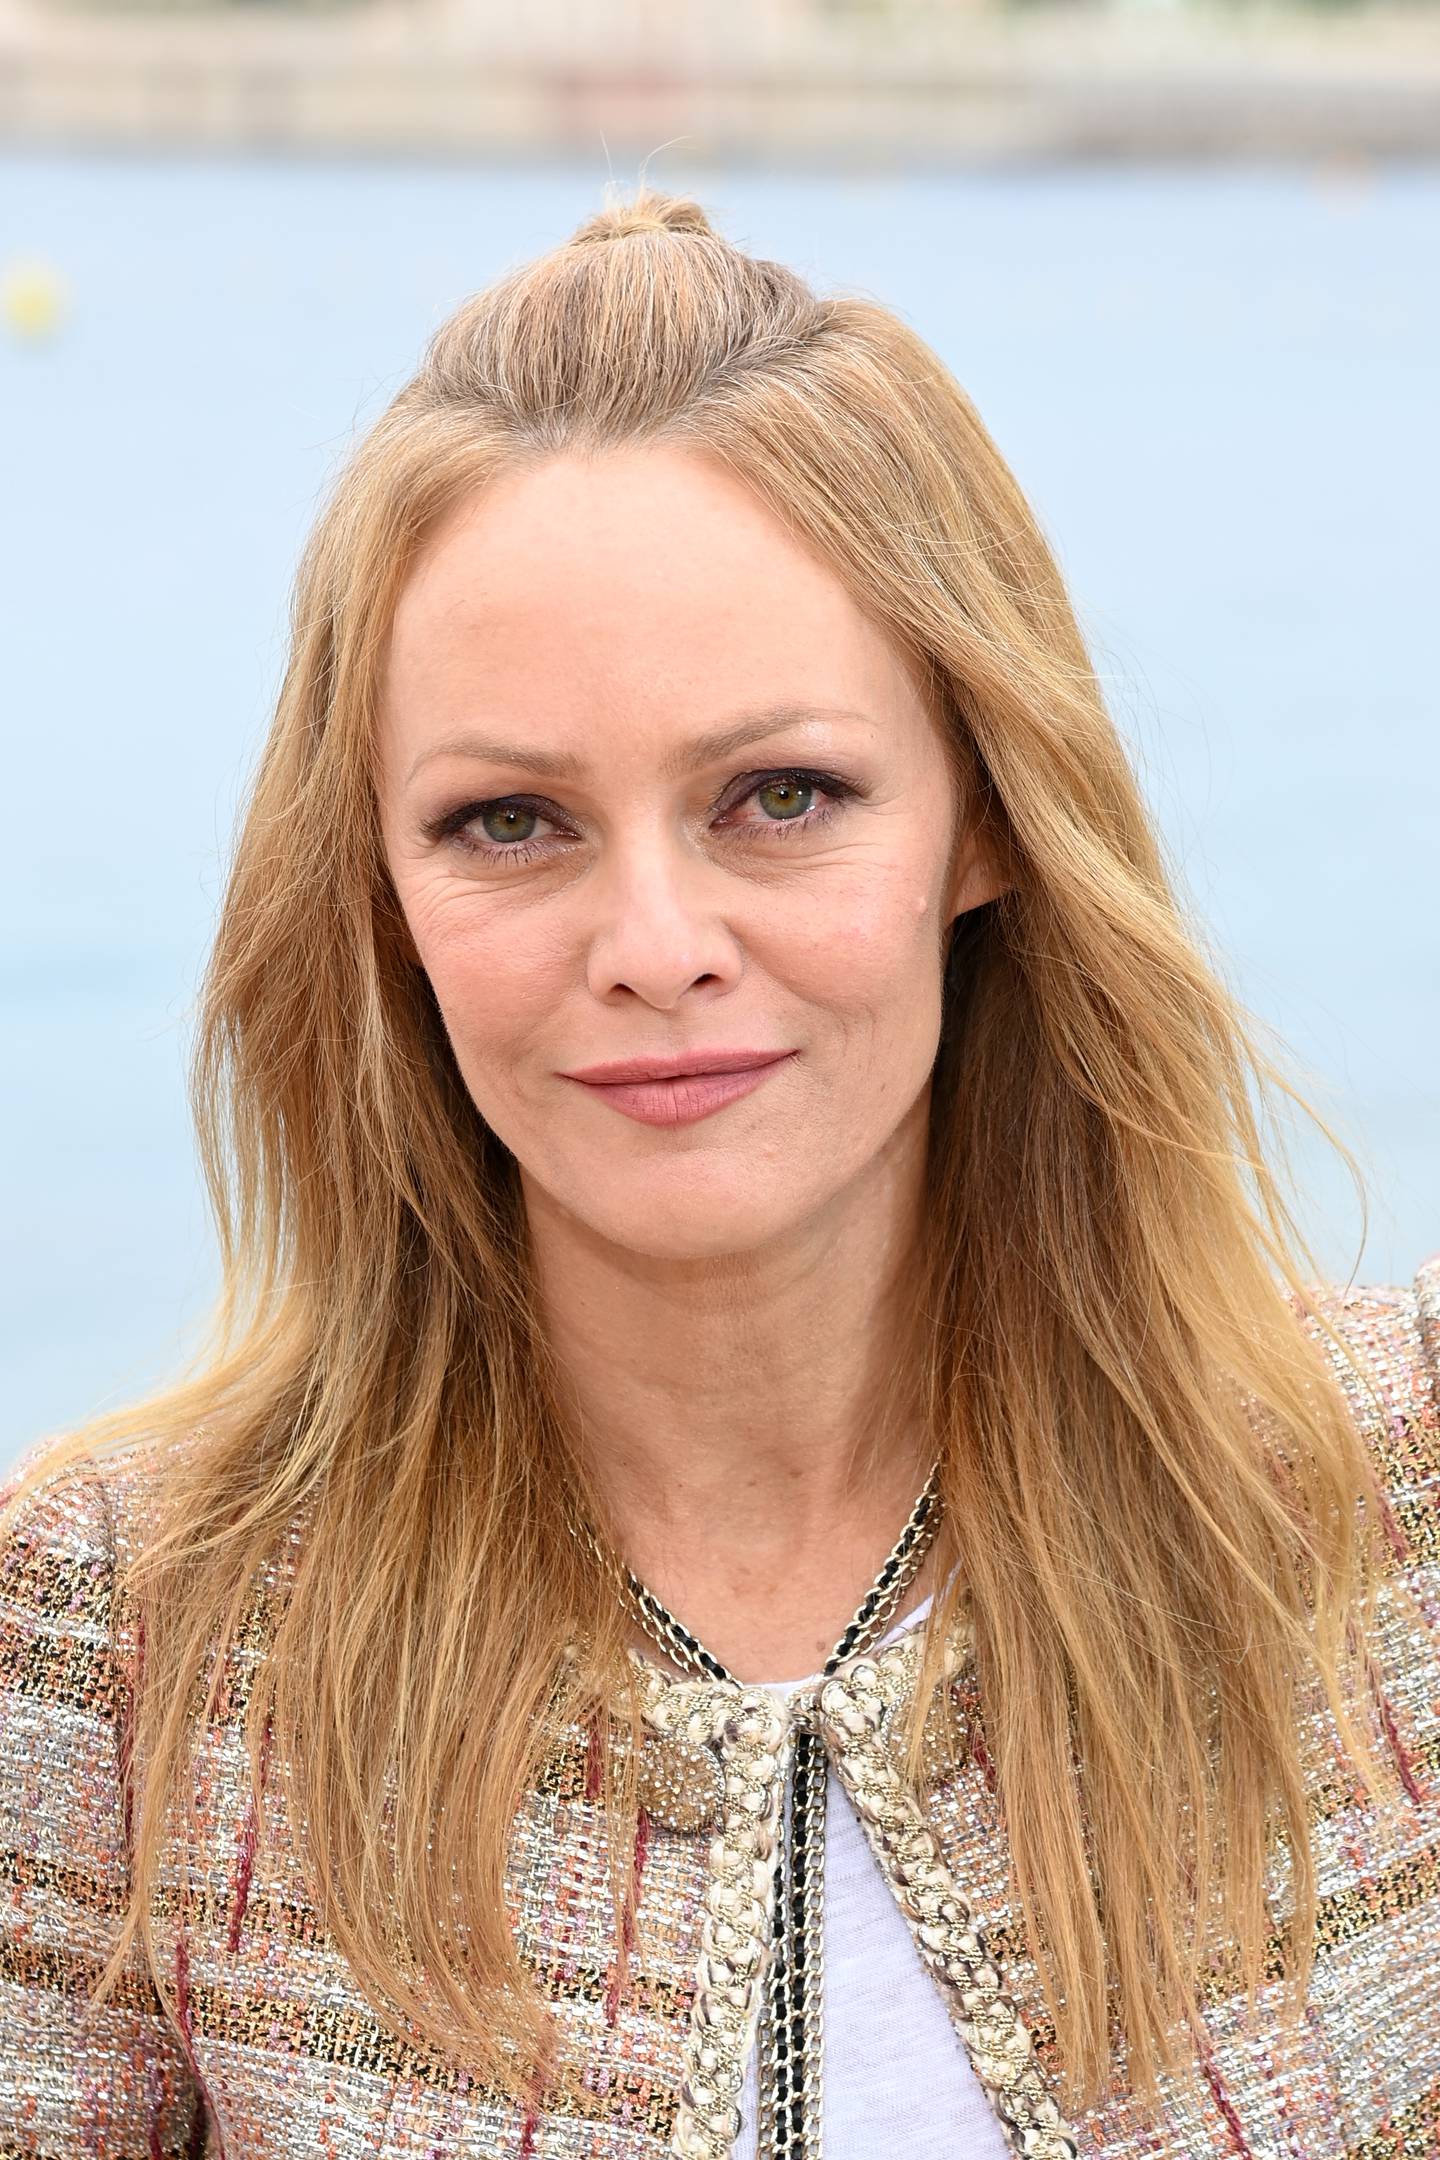 Depp's partner of 14 years, French actress and singer Vanessa Paradis, was mentioned in relation to Depp's alleged drinking and anger issues. Getty Images